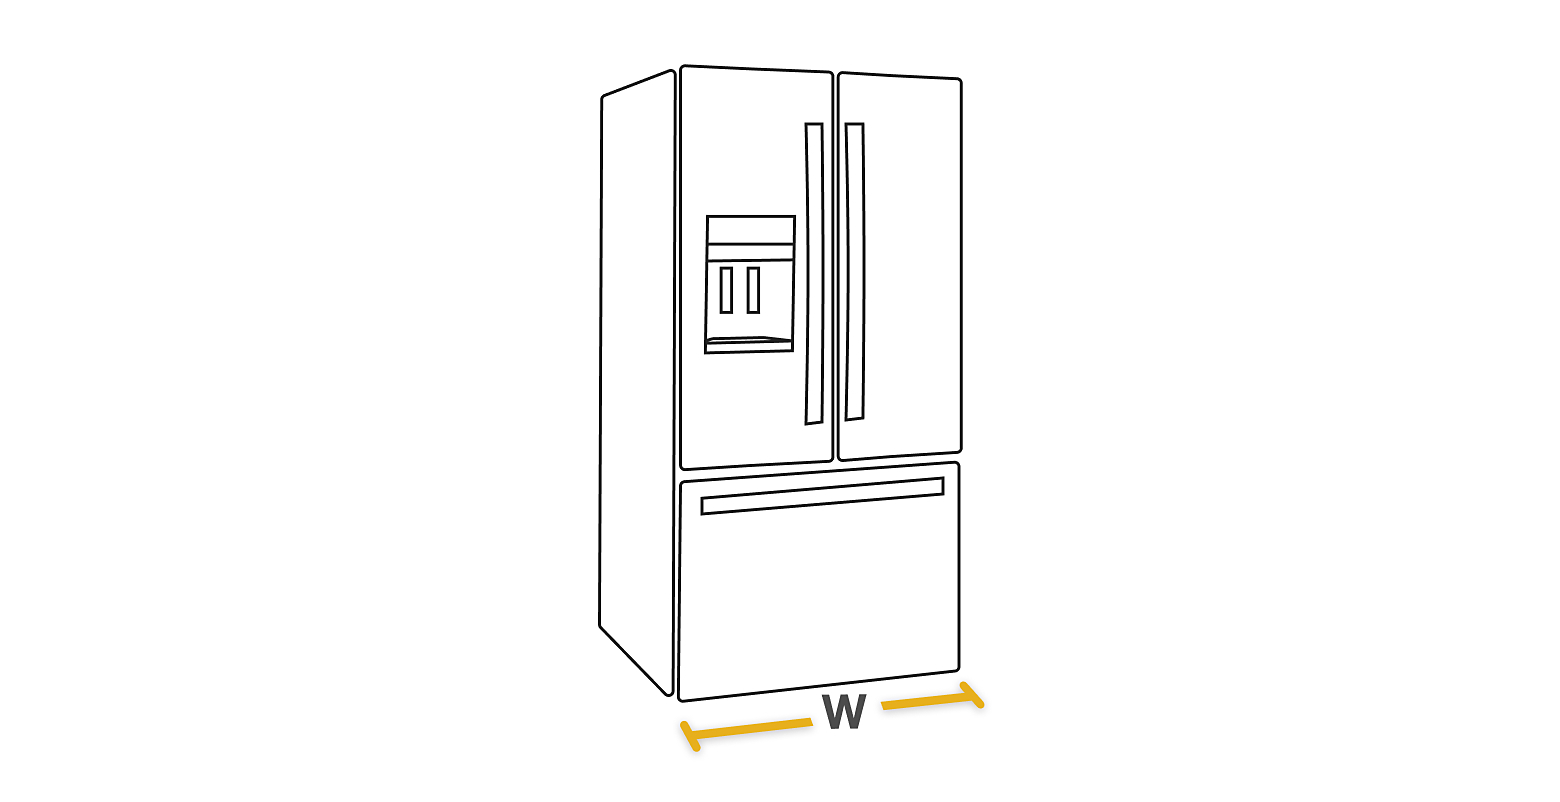 French Door refrigerator with the width diagrammed for measurements